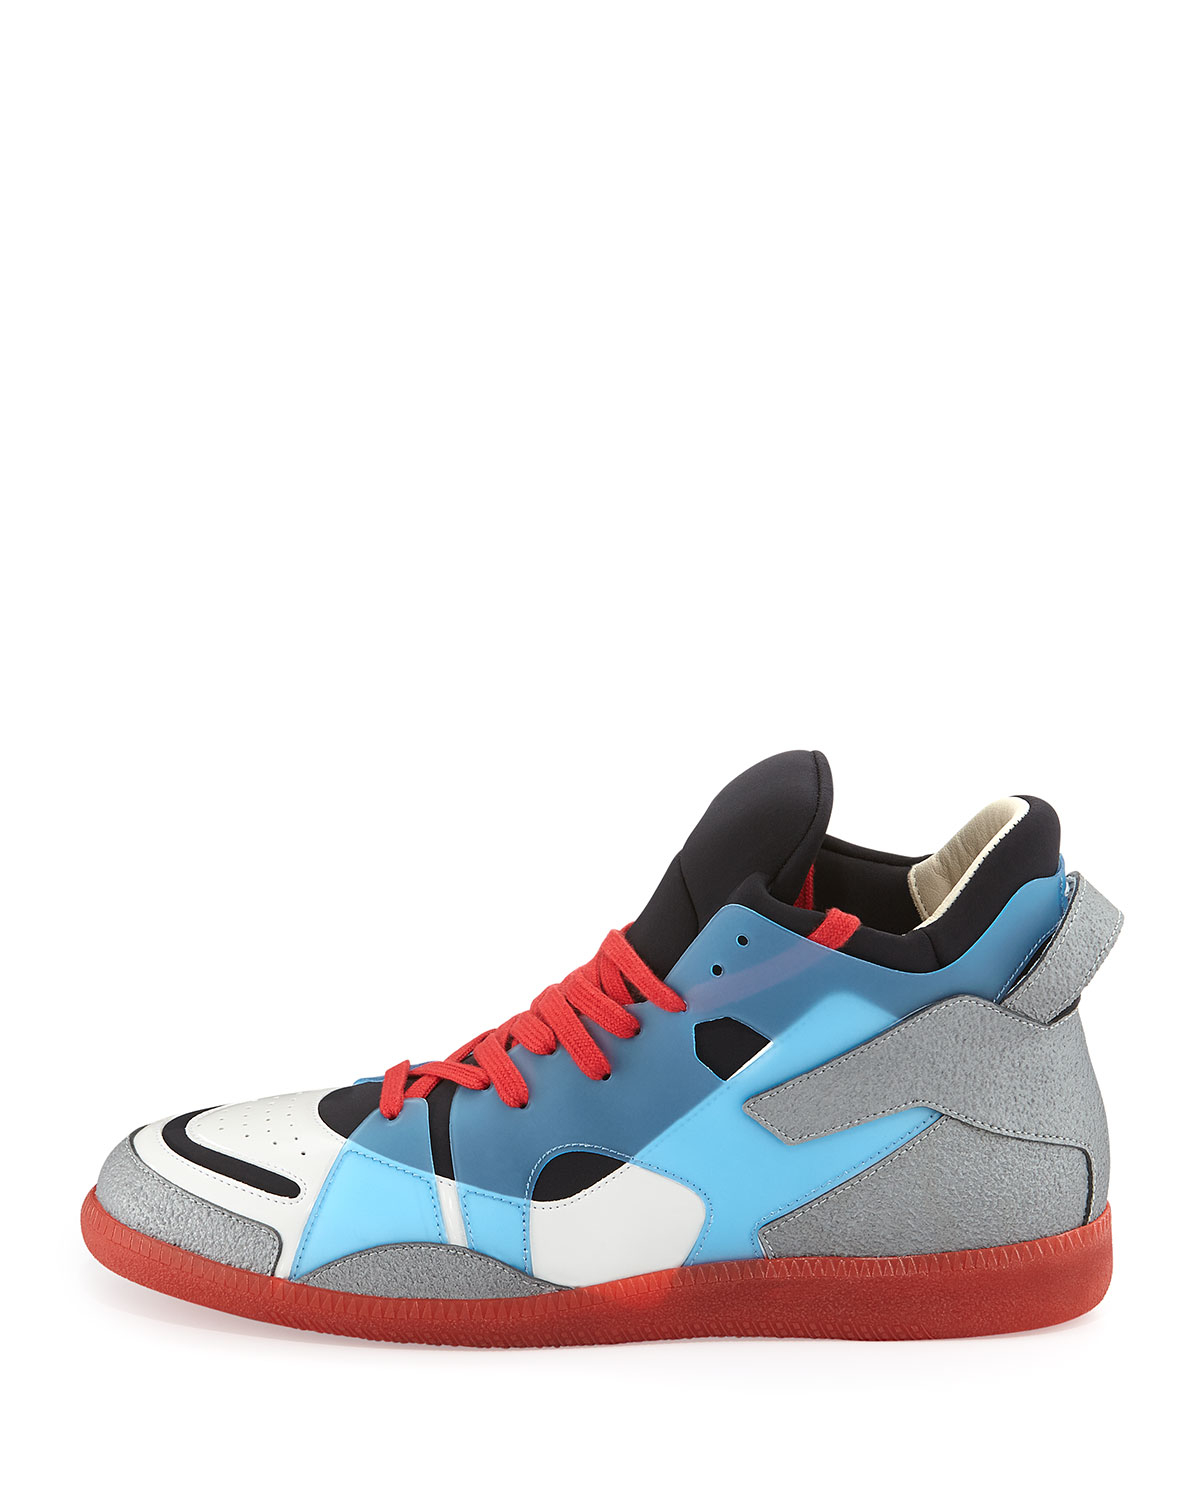 Maison margiela Neo Colorblock High-top Red-bottom Sneaker in Red ...